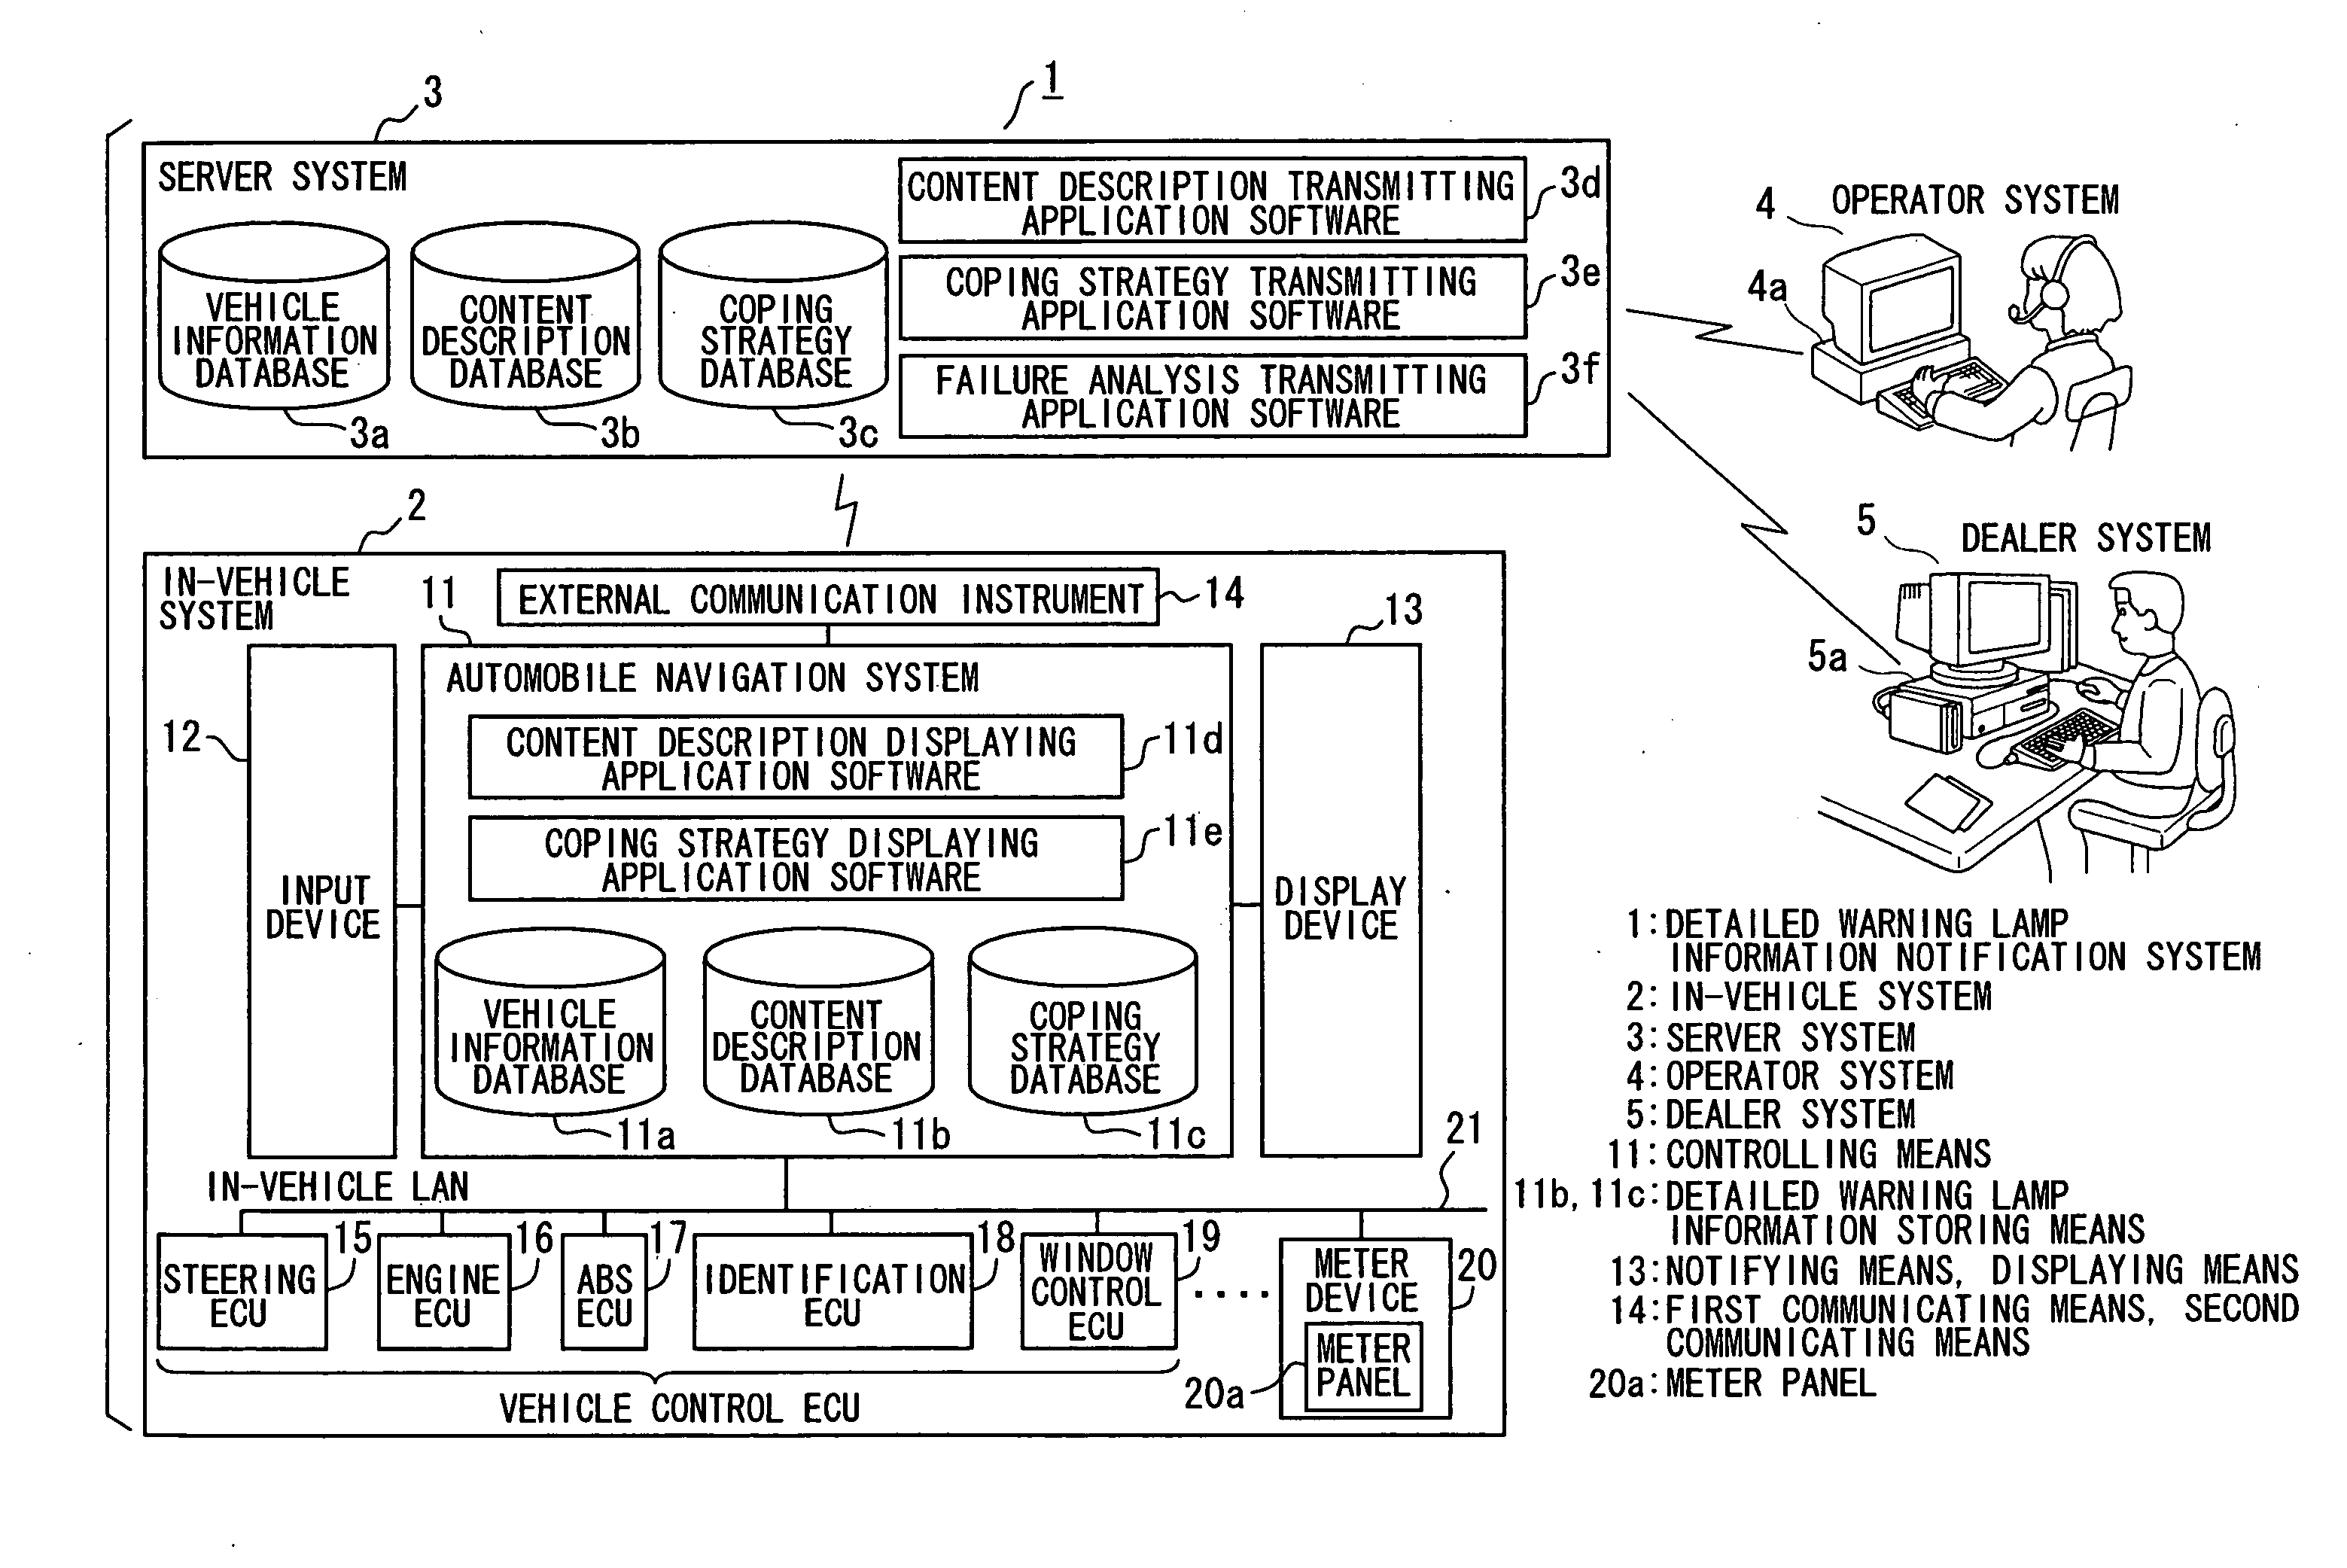 In-Vehicle System, Detailed Warning Lamp Information Notification System, and Server System